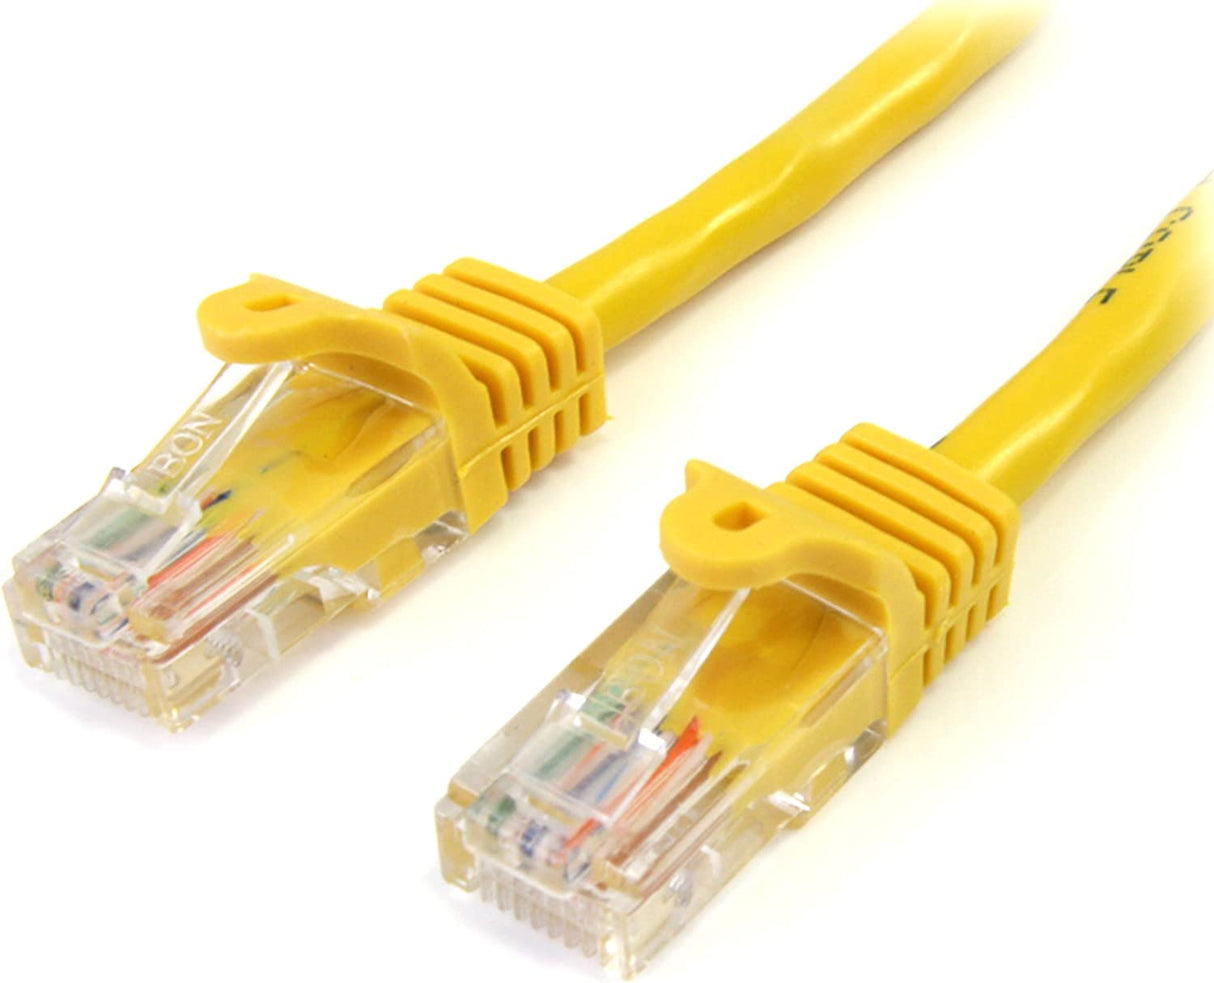 StarTech.com Cat5e Patch Cable with Snagless RJ45 Connectors - 6 ft, Yellow (45PATCH6YL) 6 ft / 2m Yellow